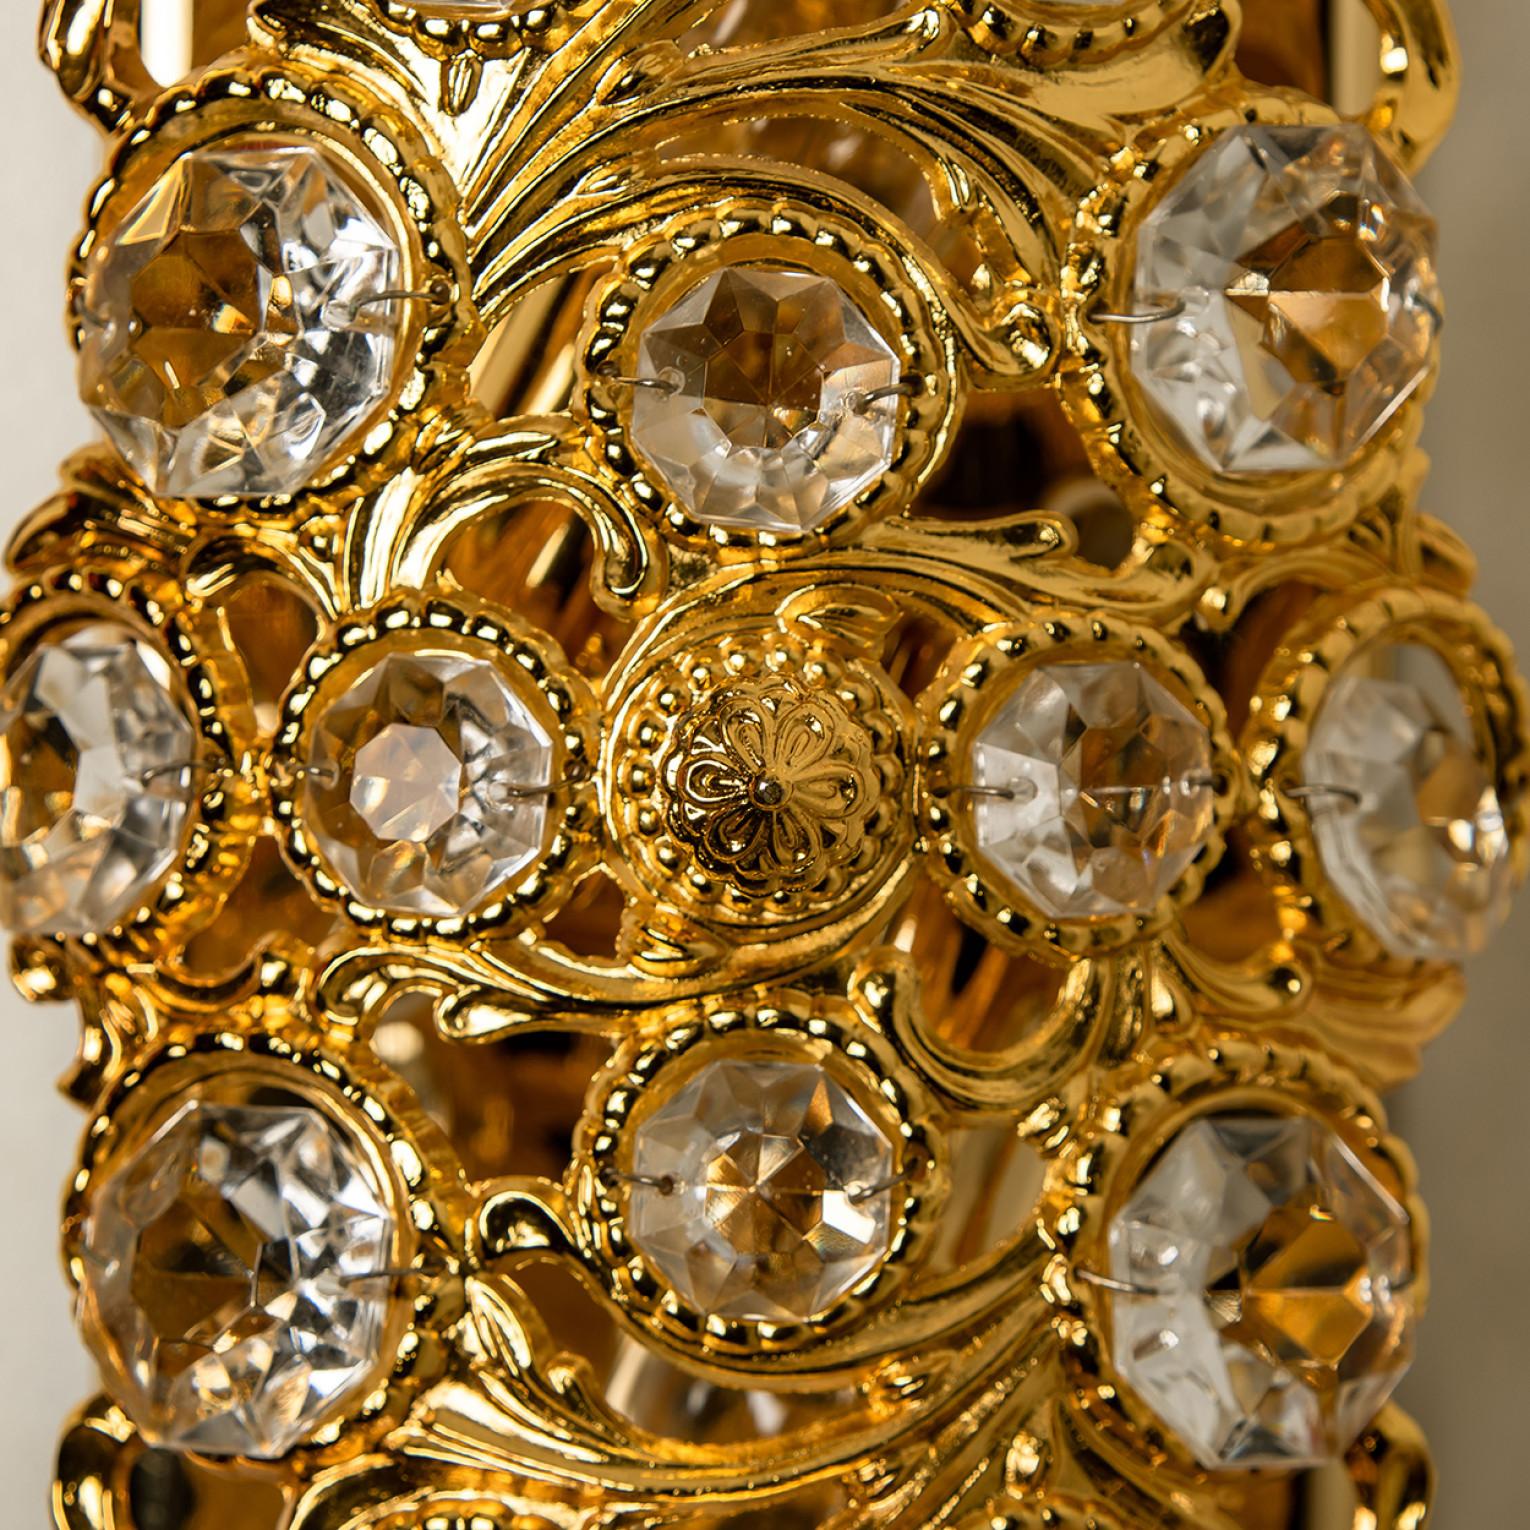 Plated Peris Andreu Gold Toned Crystal Sconces, Spain, 1960 For Sale